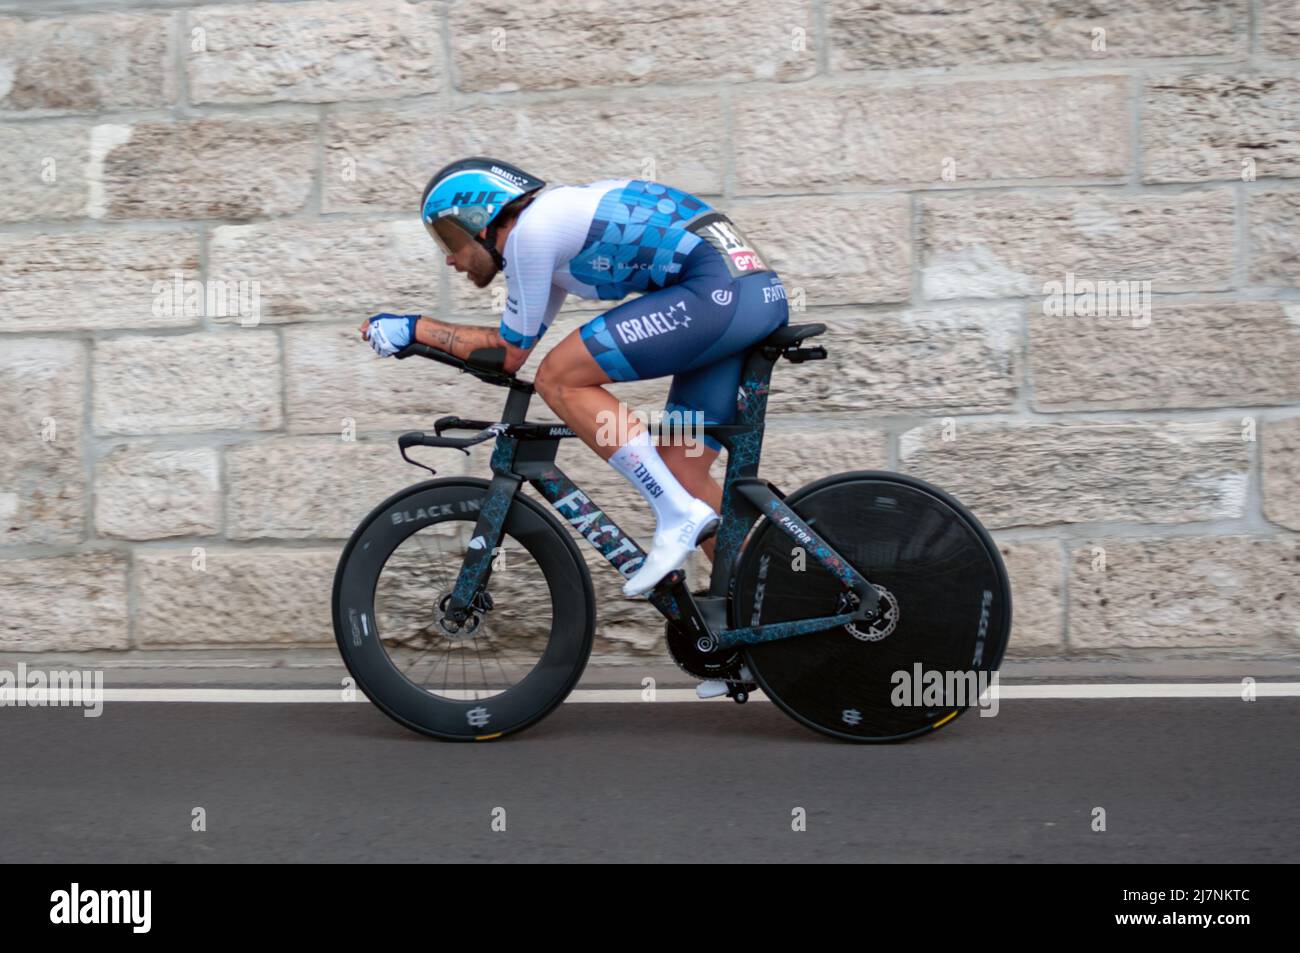 BUDAPEST, HUNGARY - MAY 07, 2022: Pro cyclist Rick Zabel ISRAEL - PREMIER TECH, Giro D'Italia Stage 2 Time trial - cycling competition on May 07, 2022 Stock Photo